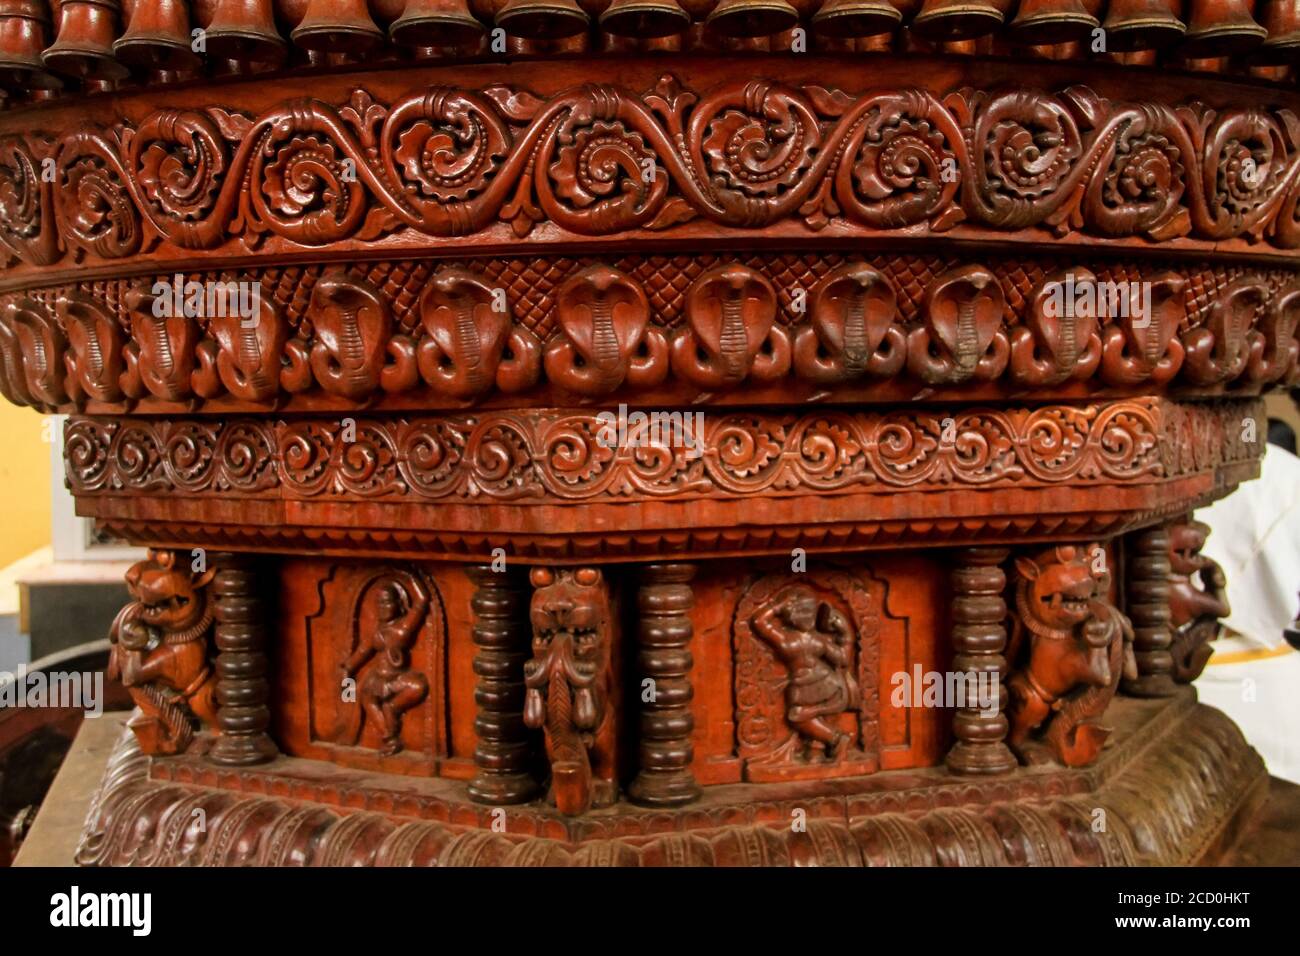 Kollur Mookambika Temple wooden chariot with engravings of serpents and & bells found in the temple of the goddess Mookambika, Karnataka, India. Stock Photo